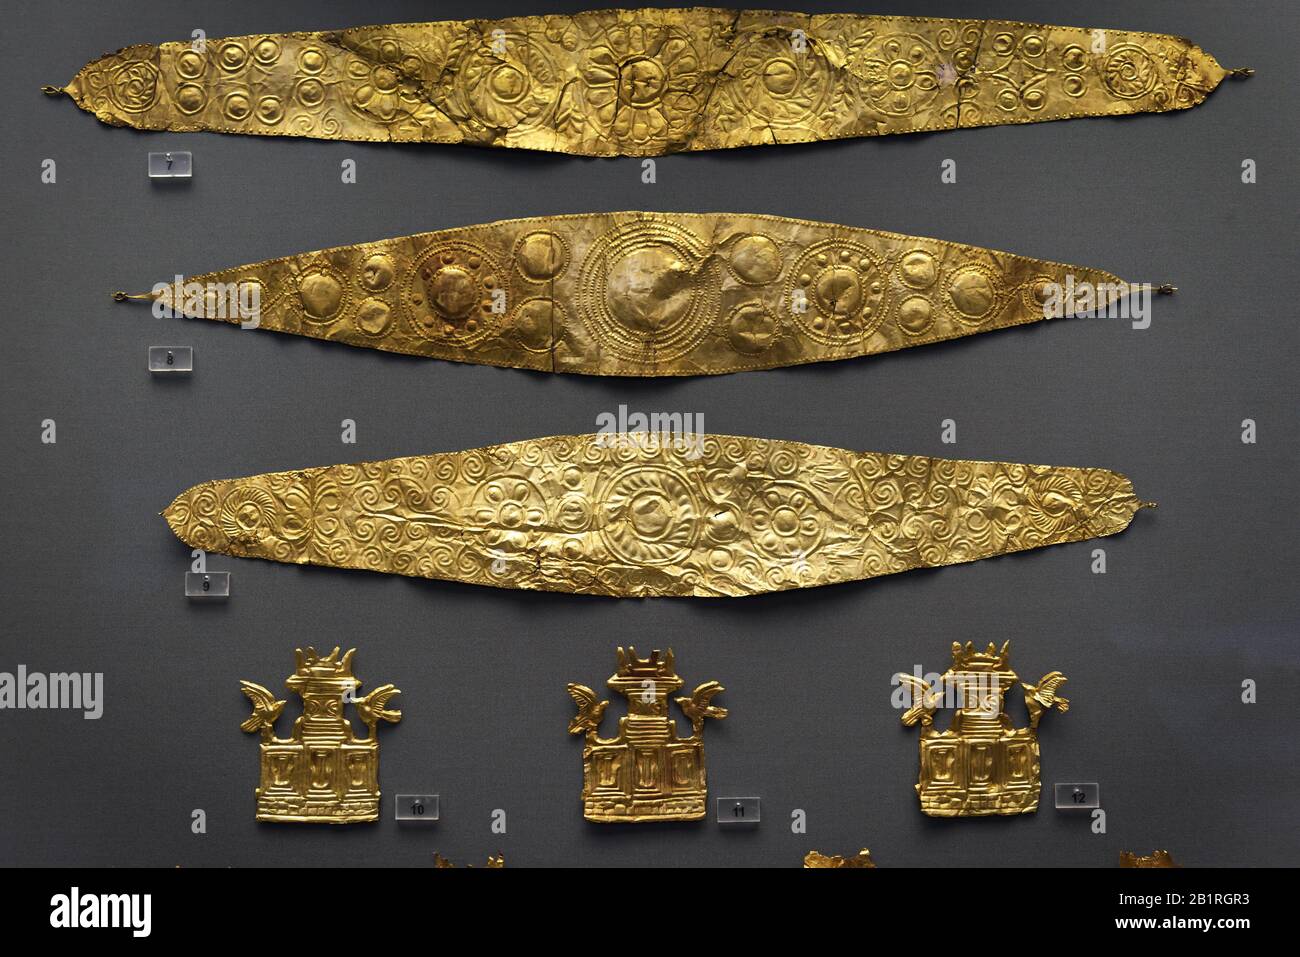 Athens - May 7, 2018: Jewellery from ancient Greek Mycenae, 16th century BC. Gold diadems and other precious objects in the National Archaeological Mu Stock Photo